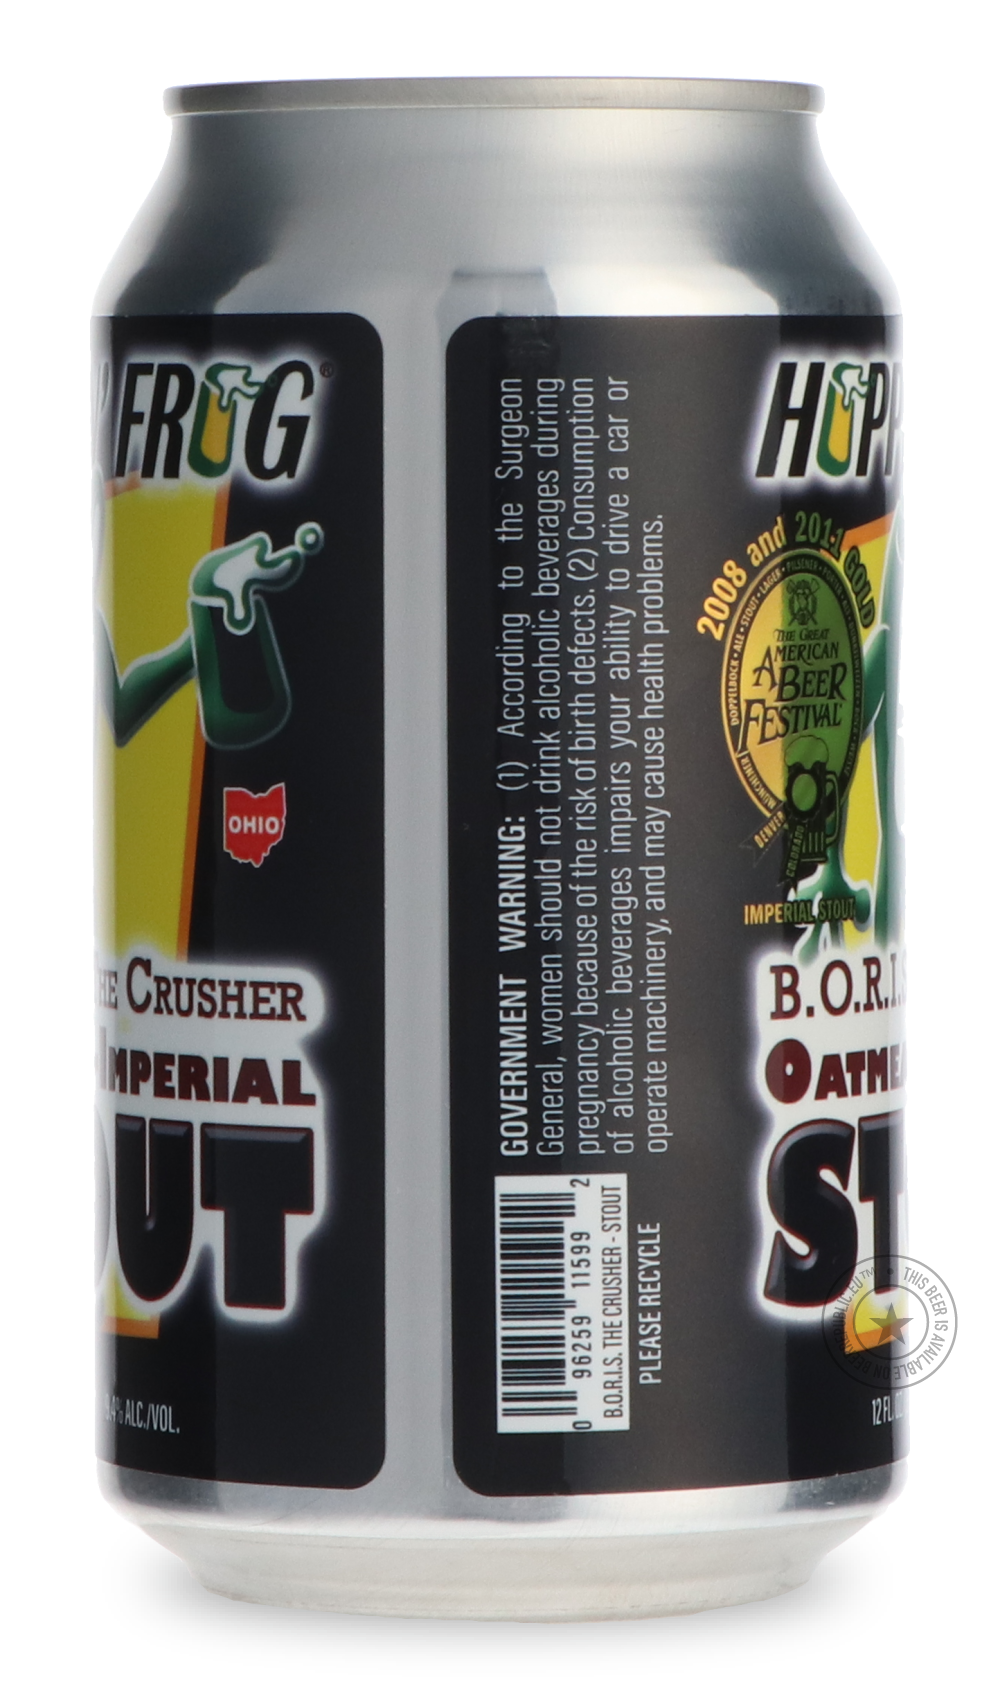 -Hoppin' Frog- B.O.R.I.S. The Crusher-Stout & Porter- Only @ Beer Republic - The best online beer store for American & Canadian craft beer - Buy beer online from the USA and Canada - Bier online kopen - Amerikaans bier kopen - Craft beer store - Craft beer kopen - Amerikanisch bier kaufen - Bier online kaufen - Acheter biere online - IPA - Stout - Porter - New England IPA - Hazy IPA - Imperial Stout - Barrel Aged - Barrel Aged Imperial Stout - Brown - Dark beer - Blond - Blonde - Pilsner - Lager - Wheat - W